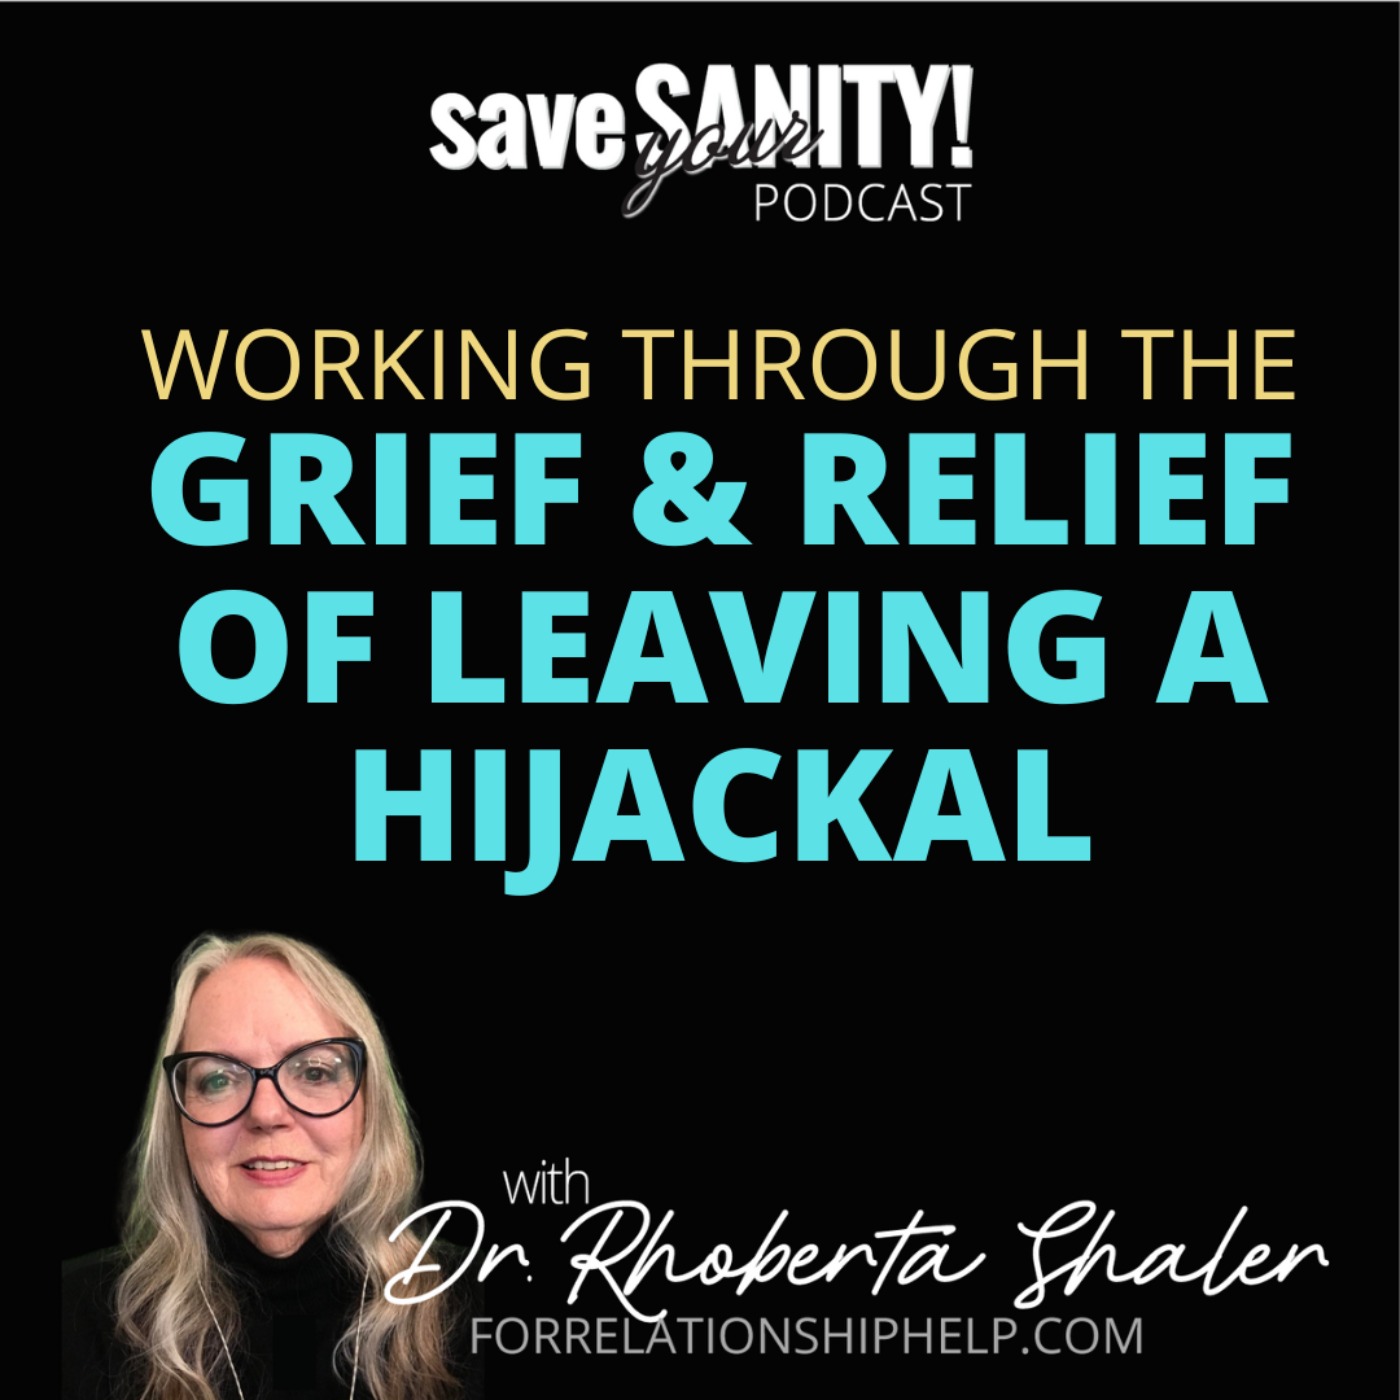 Working Through the GRIEF & RELIEF of Leaving a Hijackal